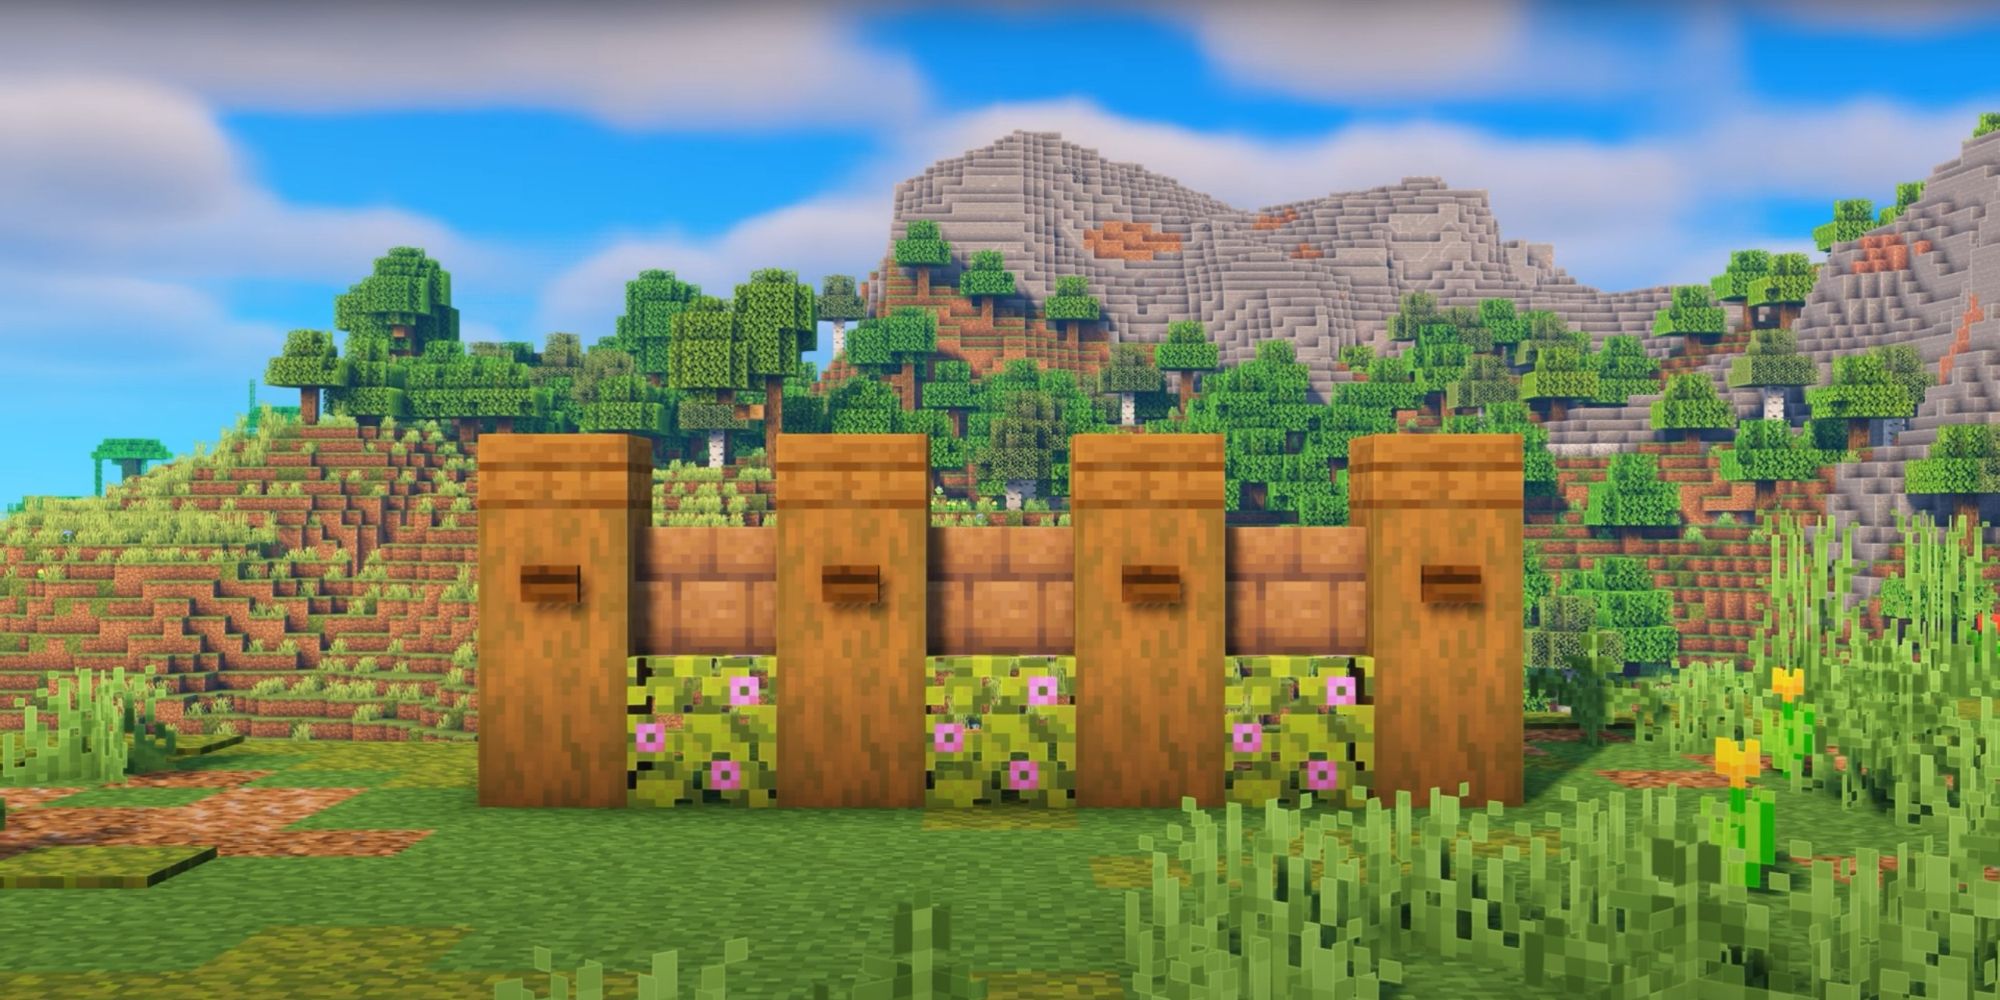 An image from Minecraft of a Village Wall Design, which can be edited to match the aesthetic of your village.